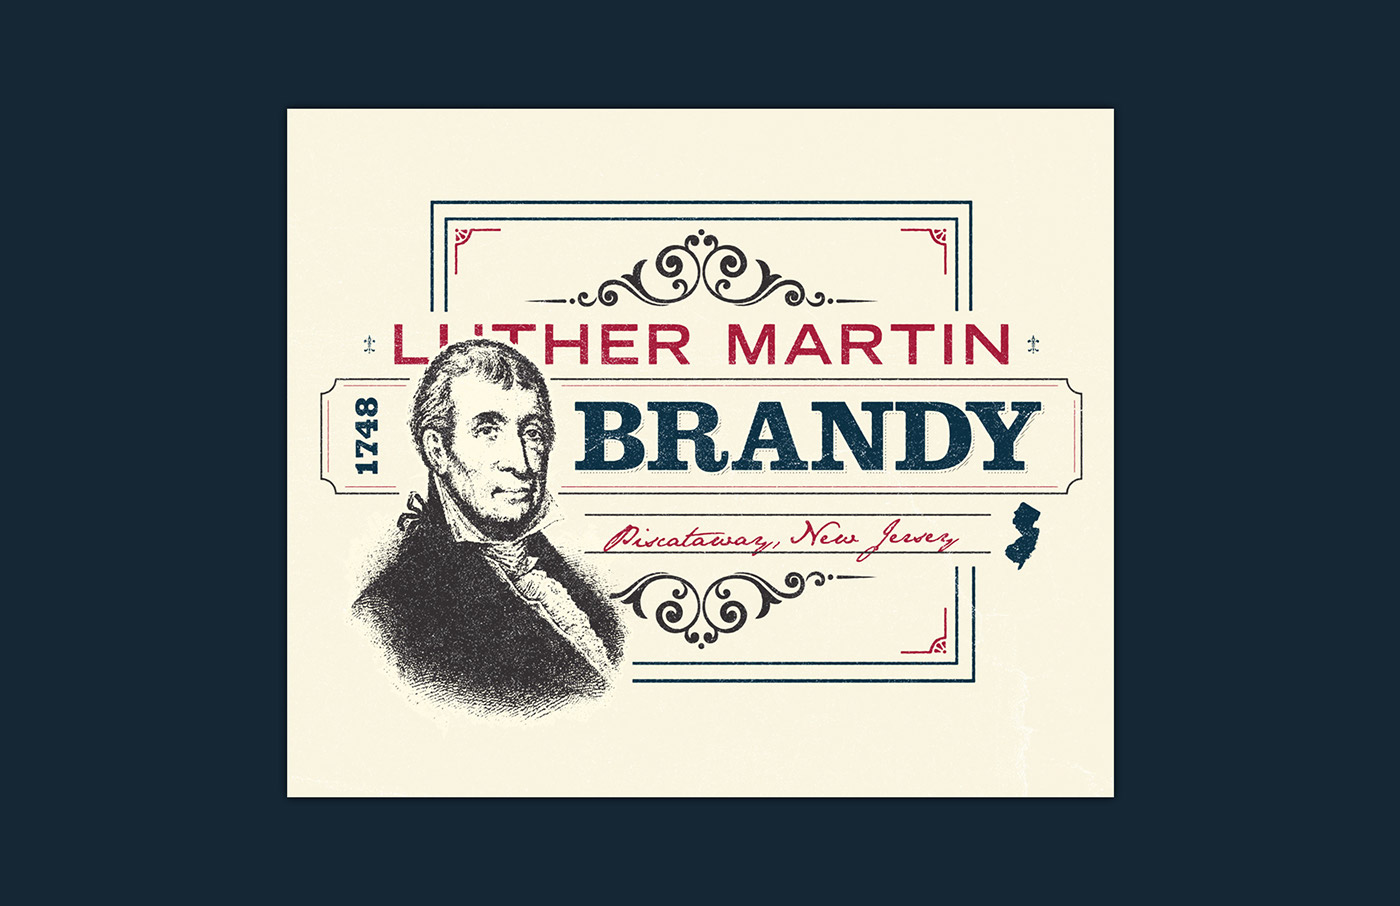 thrillist History channel Editorial Illustration alcohol labels Whiskey wine gin Brandy Rum founding fathers vintage